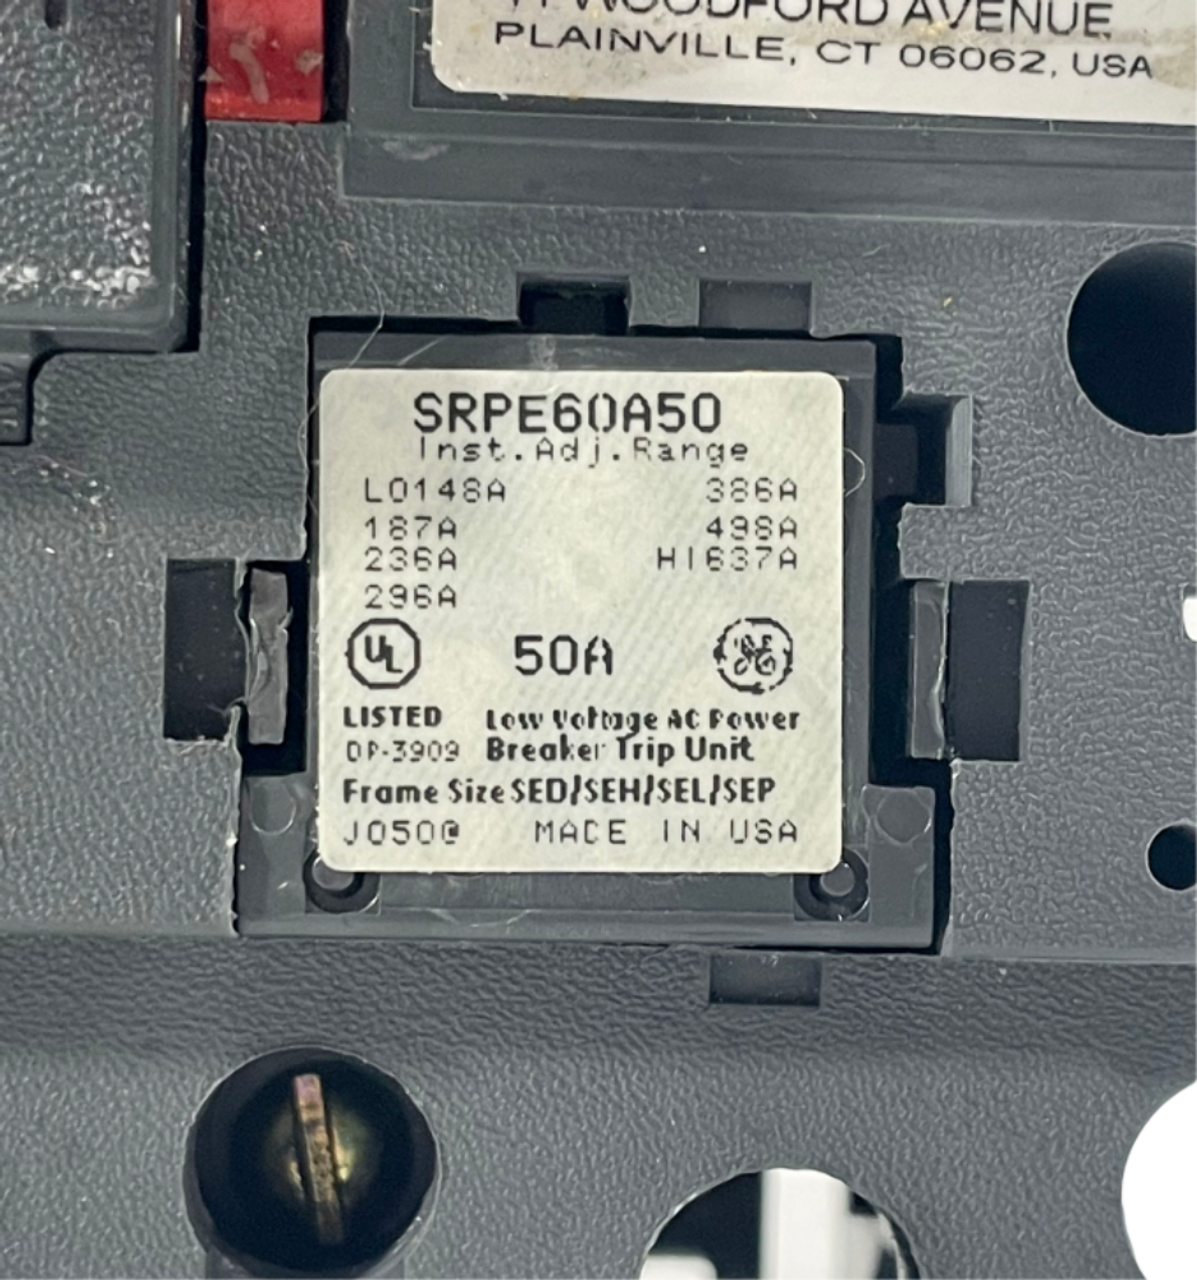 GE SELA36AT0060 Spectra RMS Breaker 60A 600V 3P 25kA with Rating Plug SRPE60A50